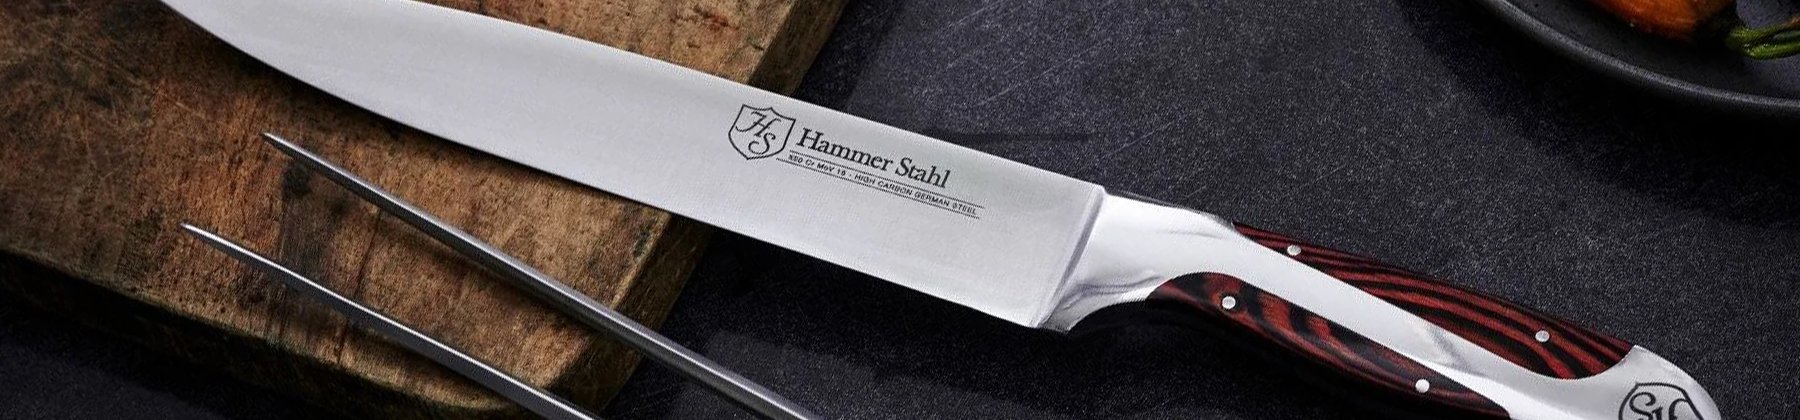 Photo of Hammer Stahl carving and slicing knives.